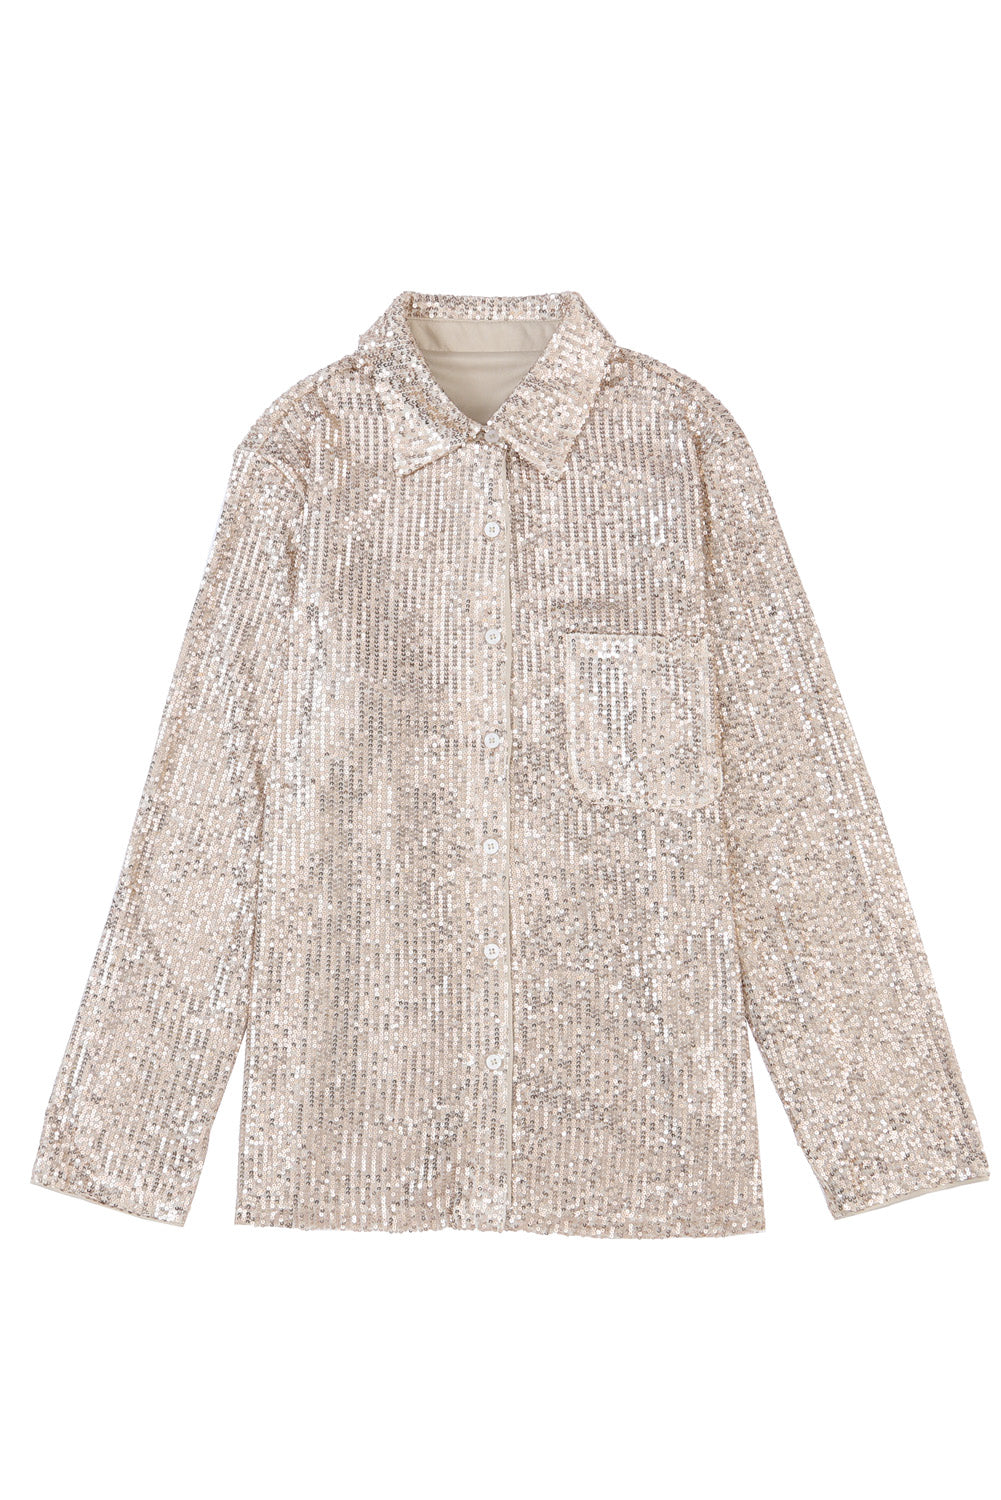 Apricot Sequin Collared Bust Pocket Buttoned Shirt